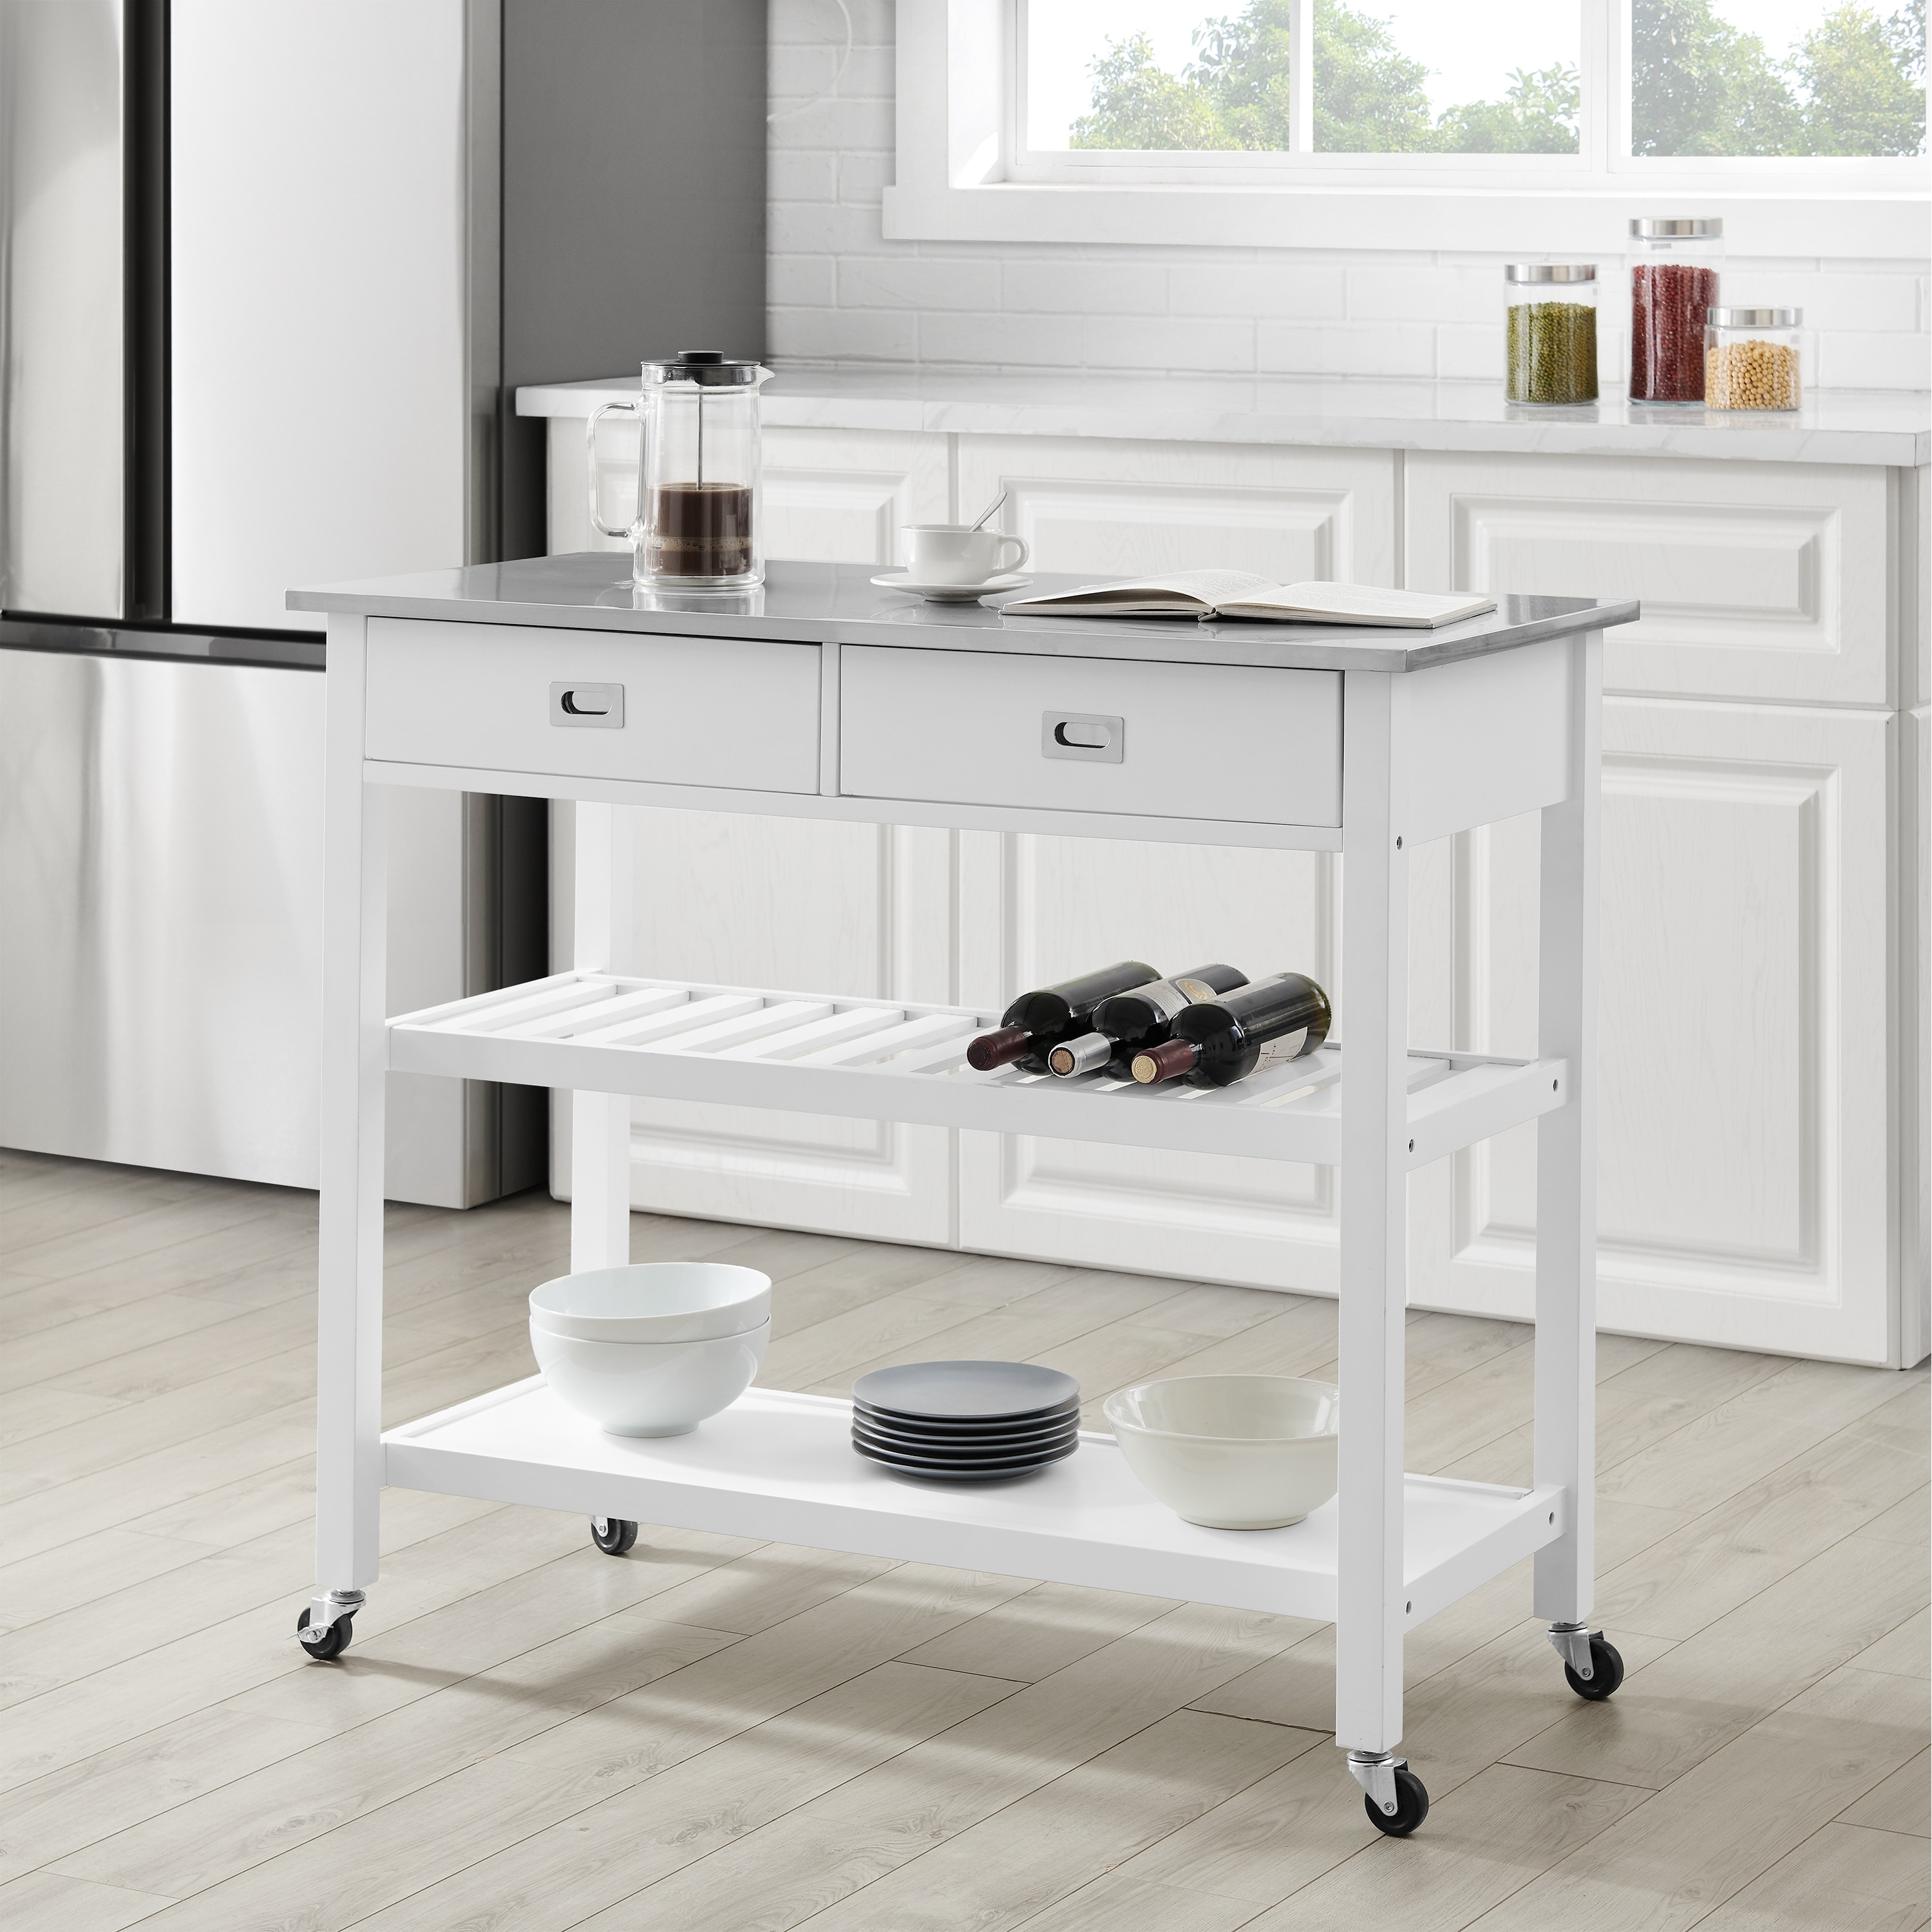 Chloe Stainless Steel Top Kitchen Island Cart 37h X 42w X 20d On Sale Overstock 31104175